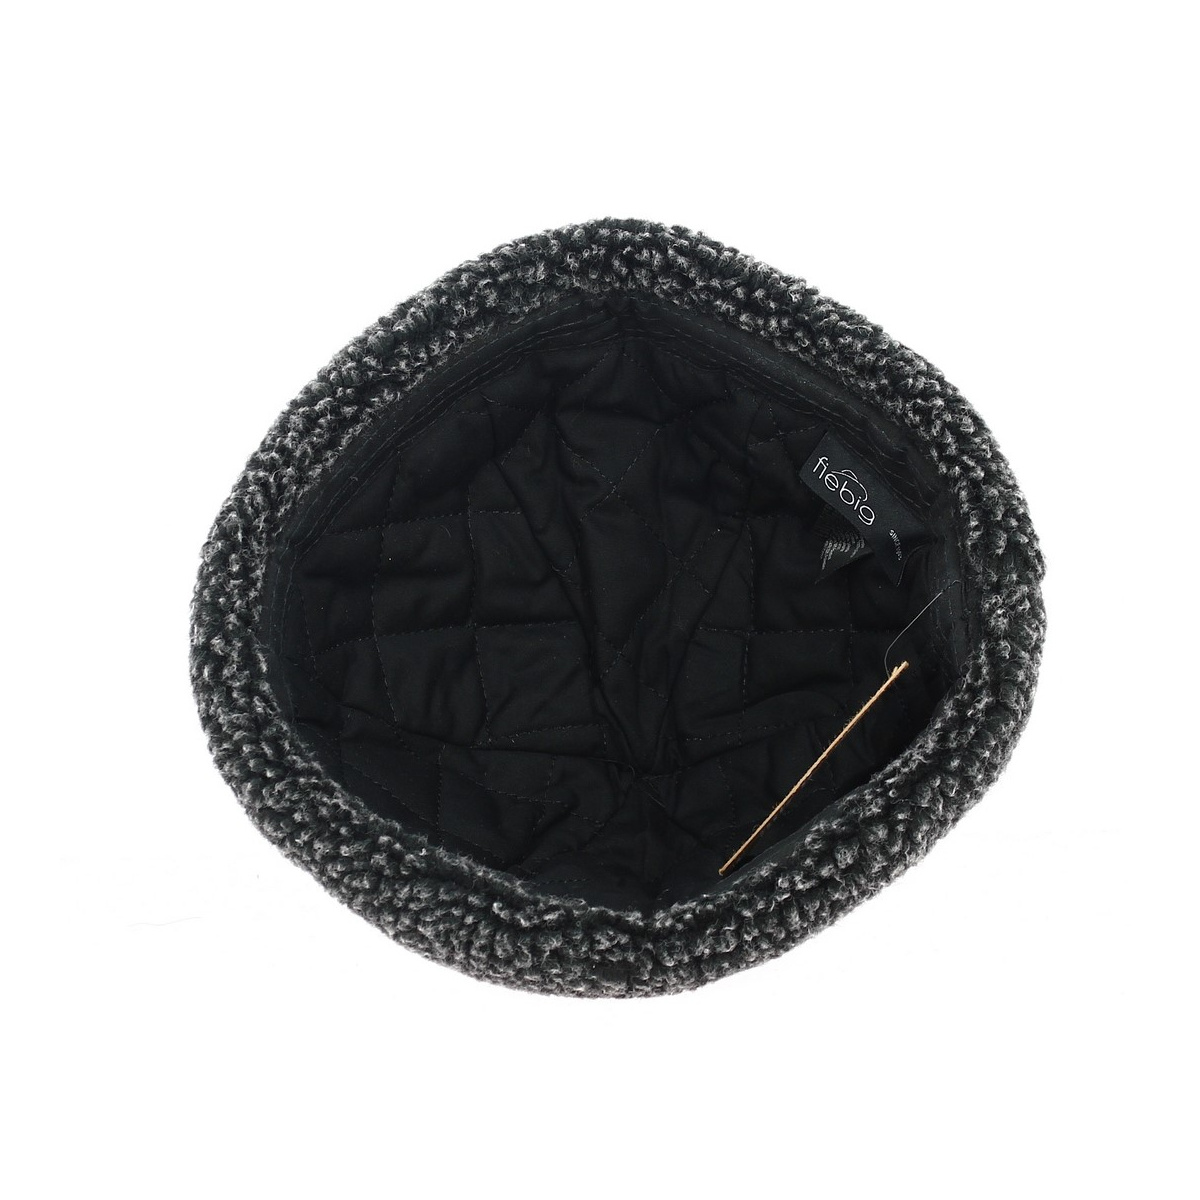 Docker Anthracite Faux Fur Hat - Traclet Reference : 11329